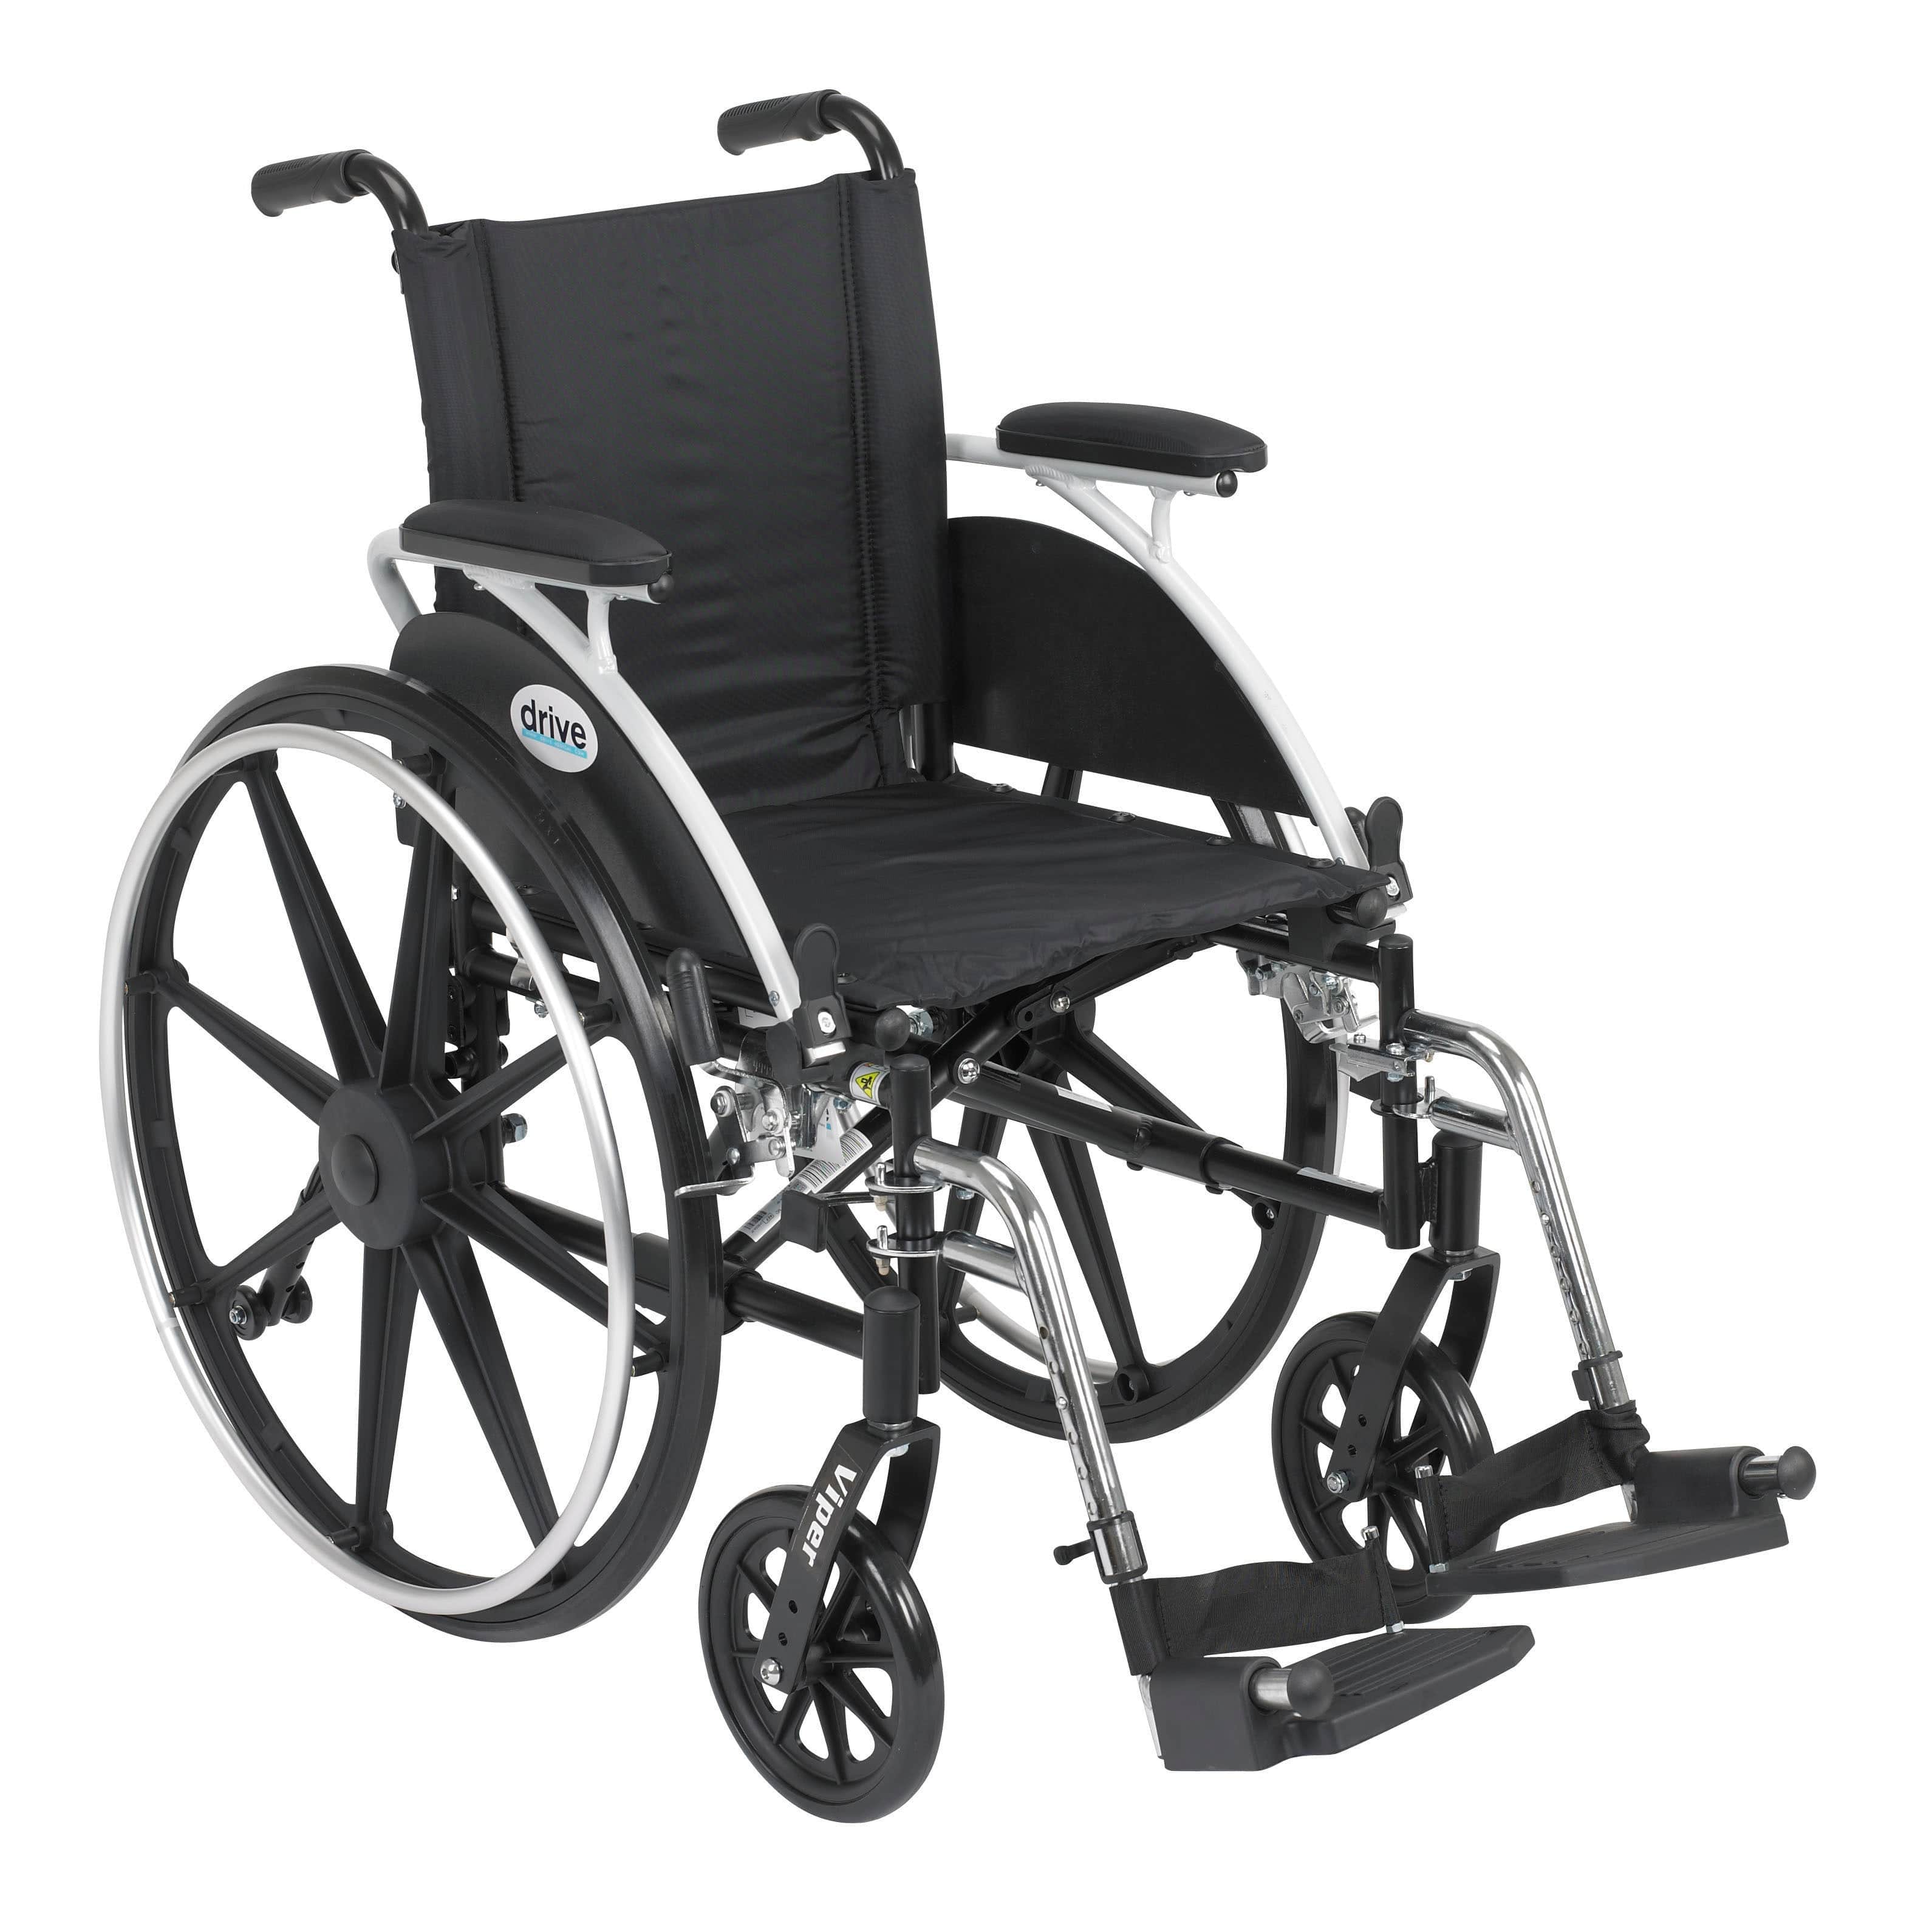 Drive Medical Wheelchairs Flip Back Removable Desk Arms and Swing away Footrests / 12" Seat Drive Medical Viper Wheelchair with Flip Back Removable Arms